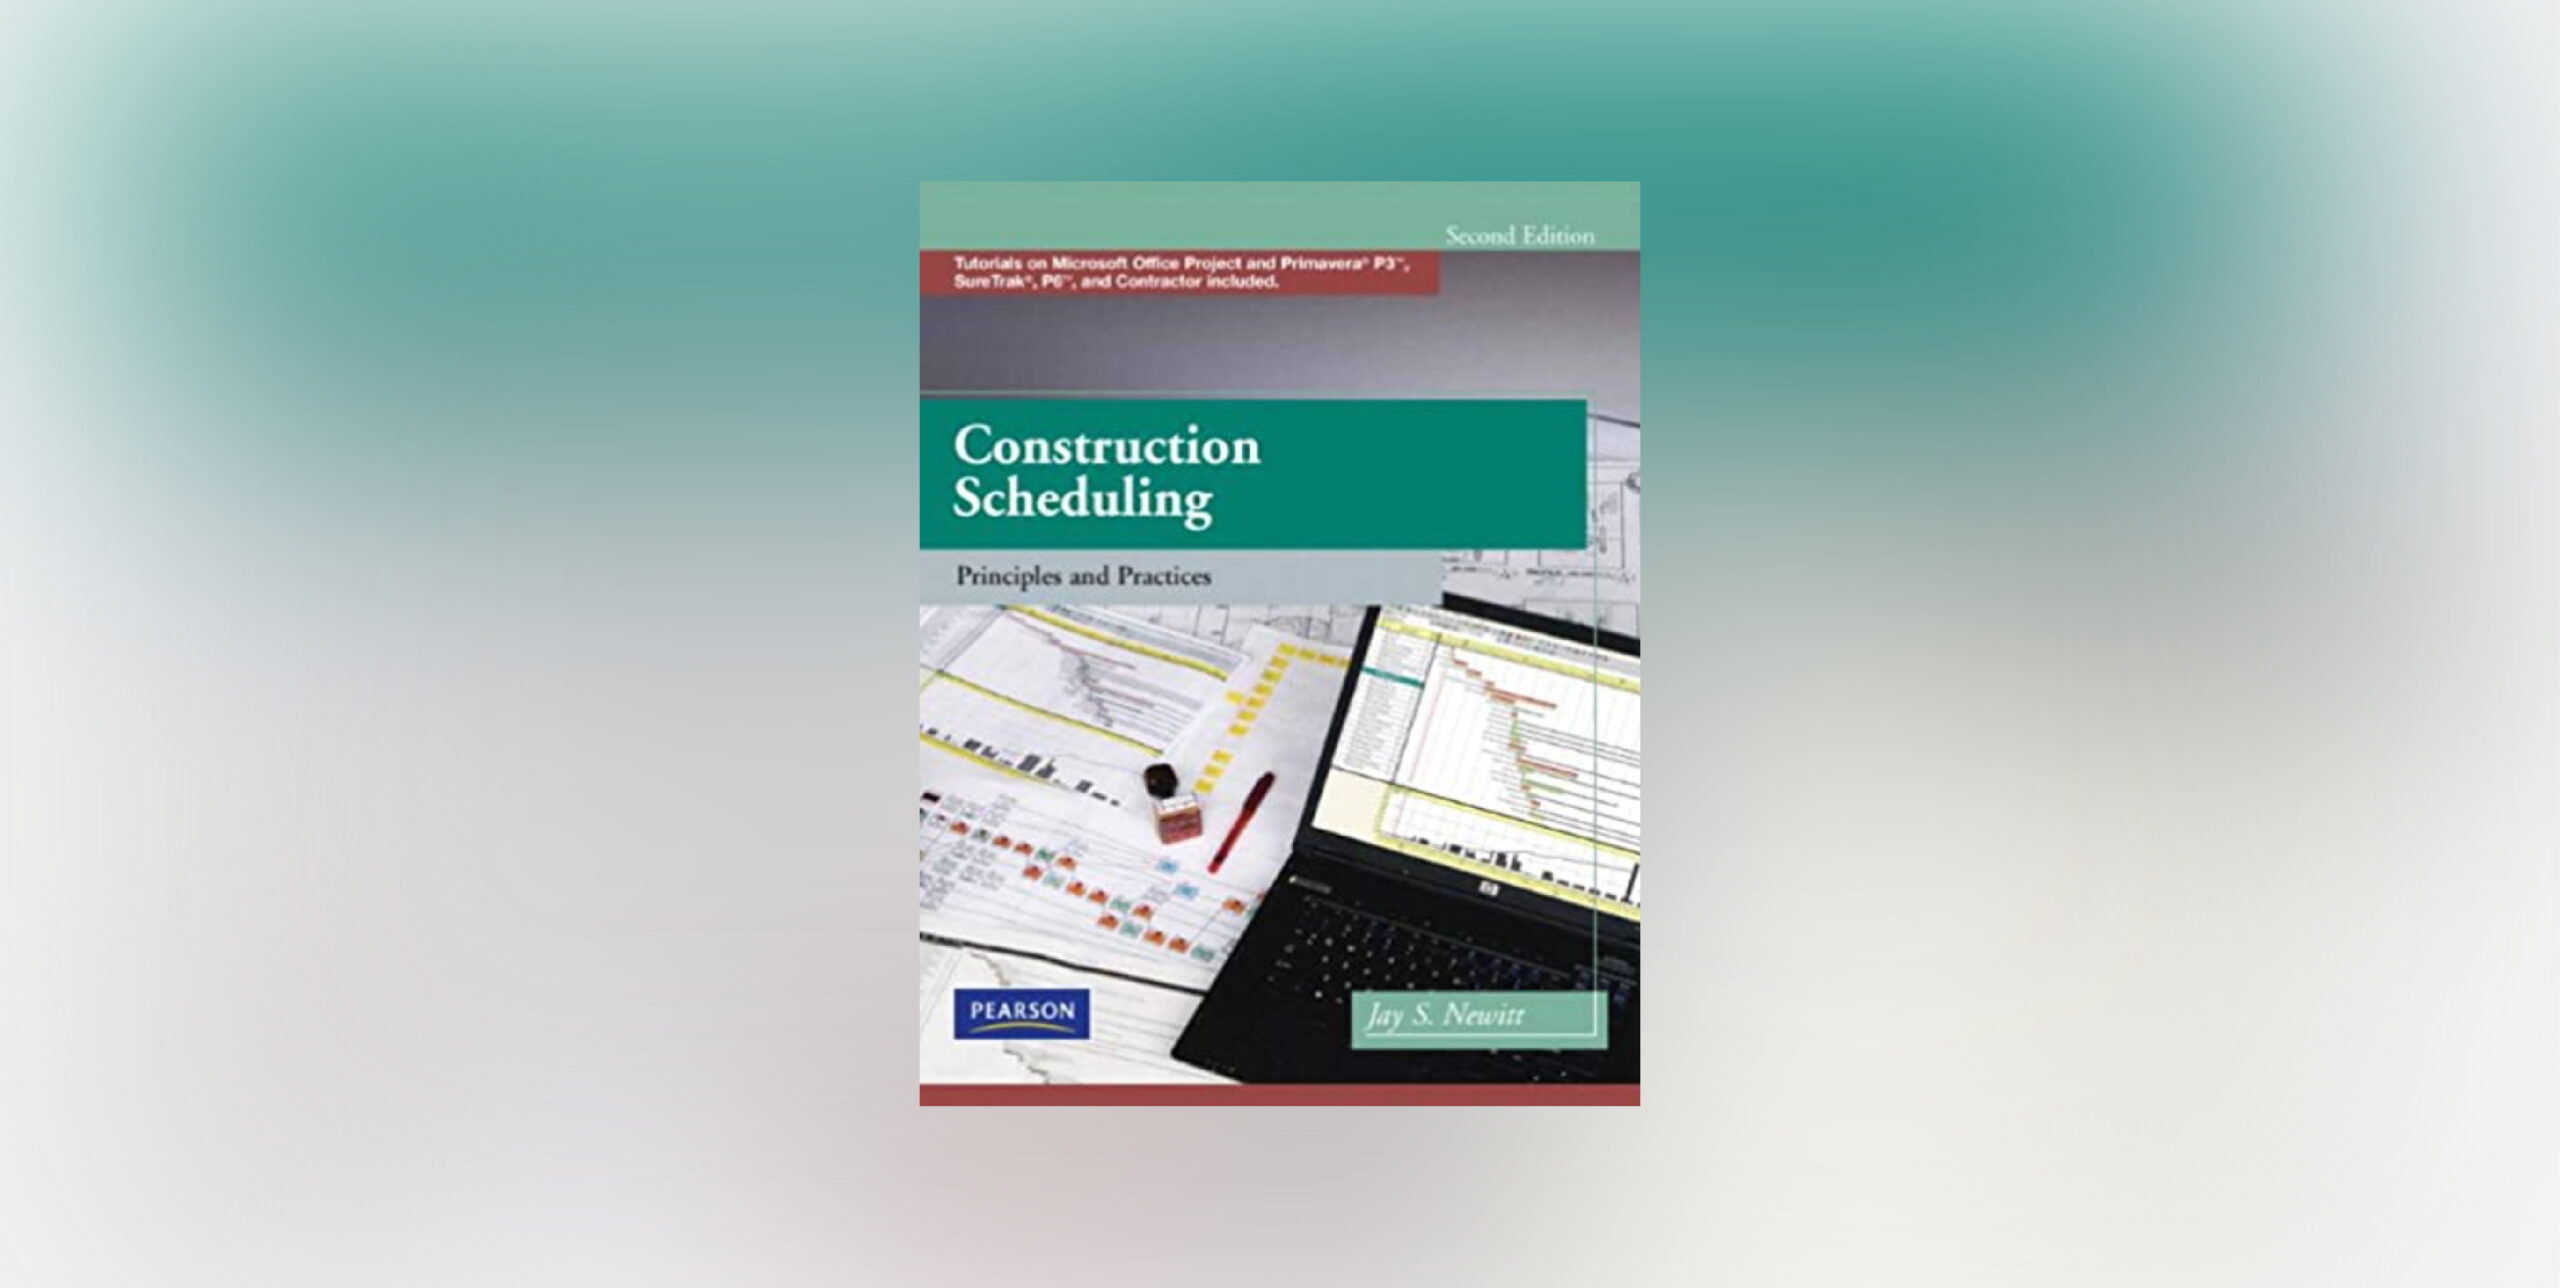 Construction scheduling book on green background